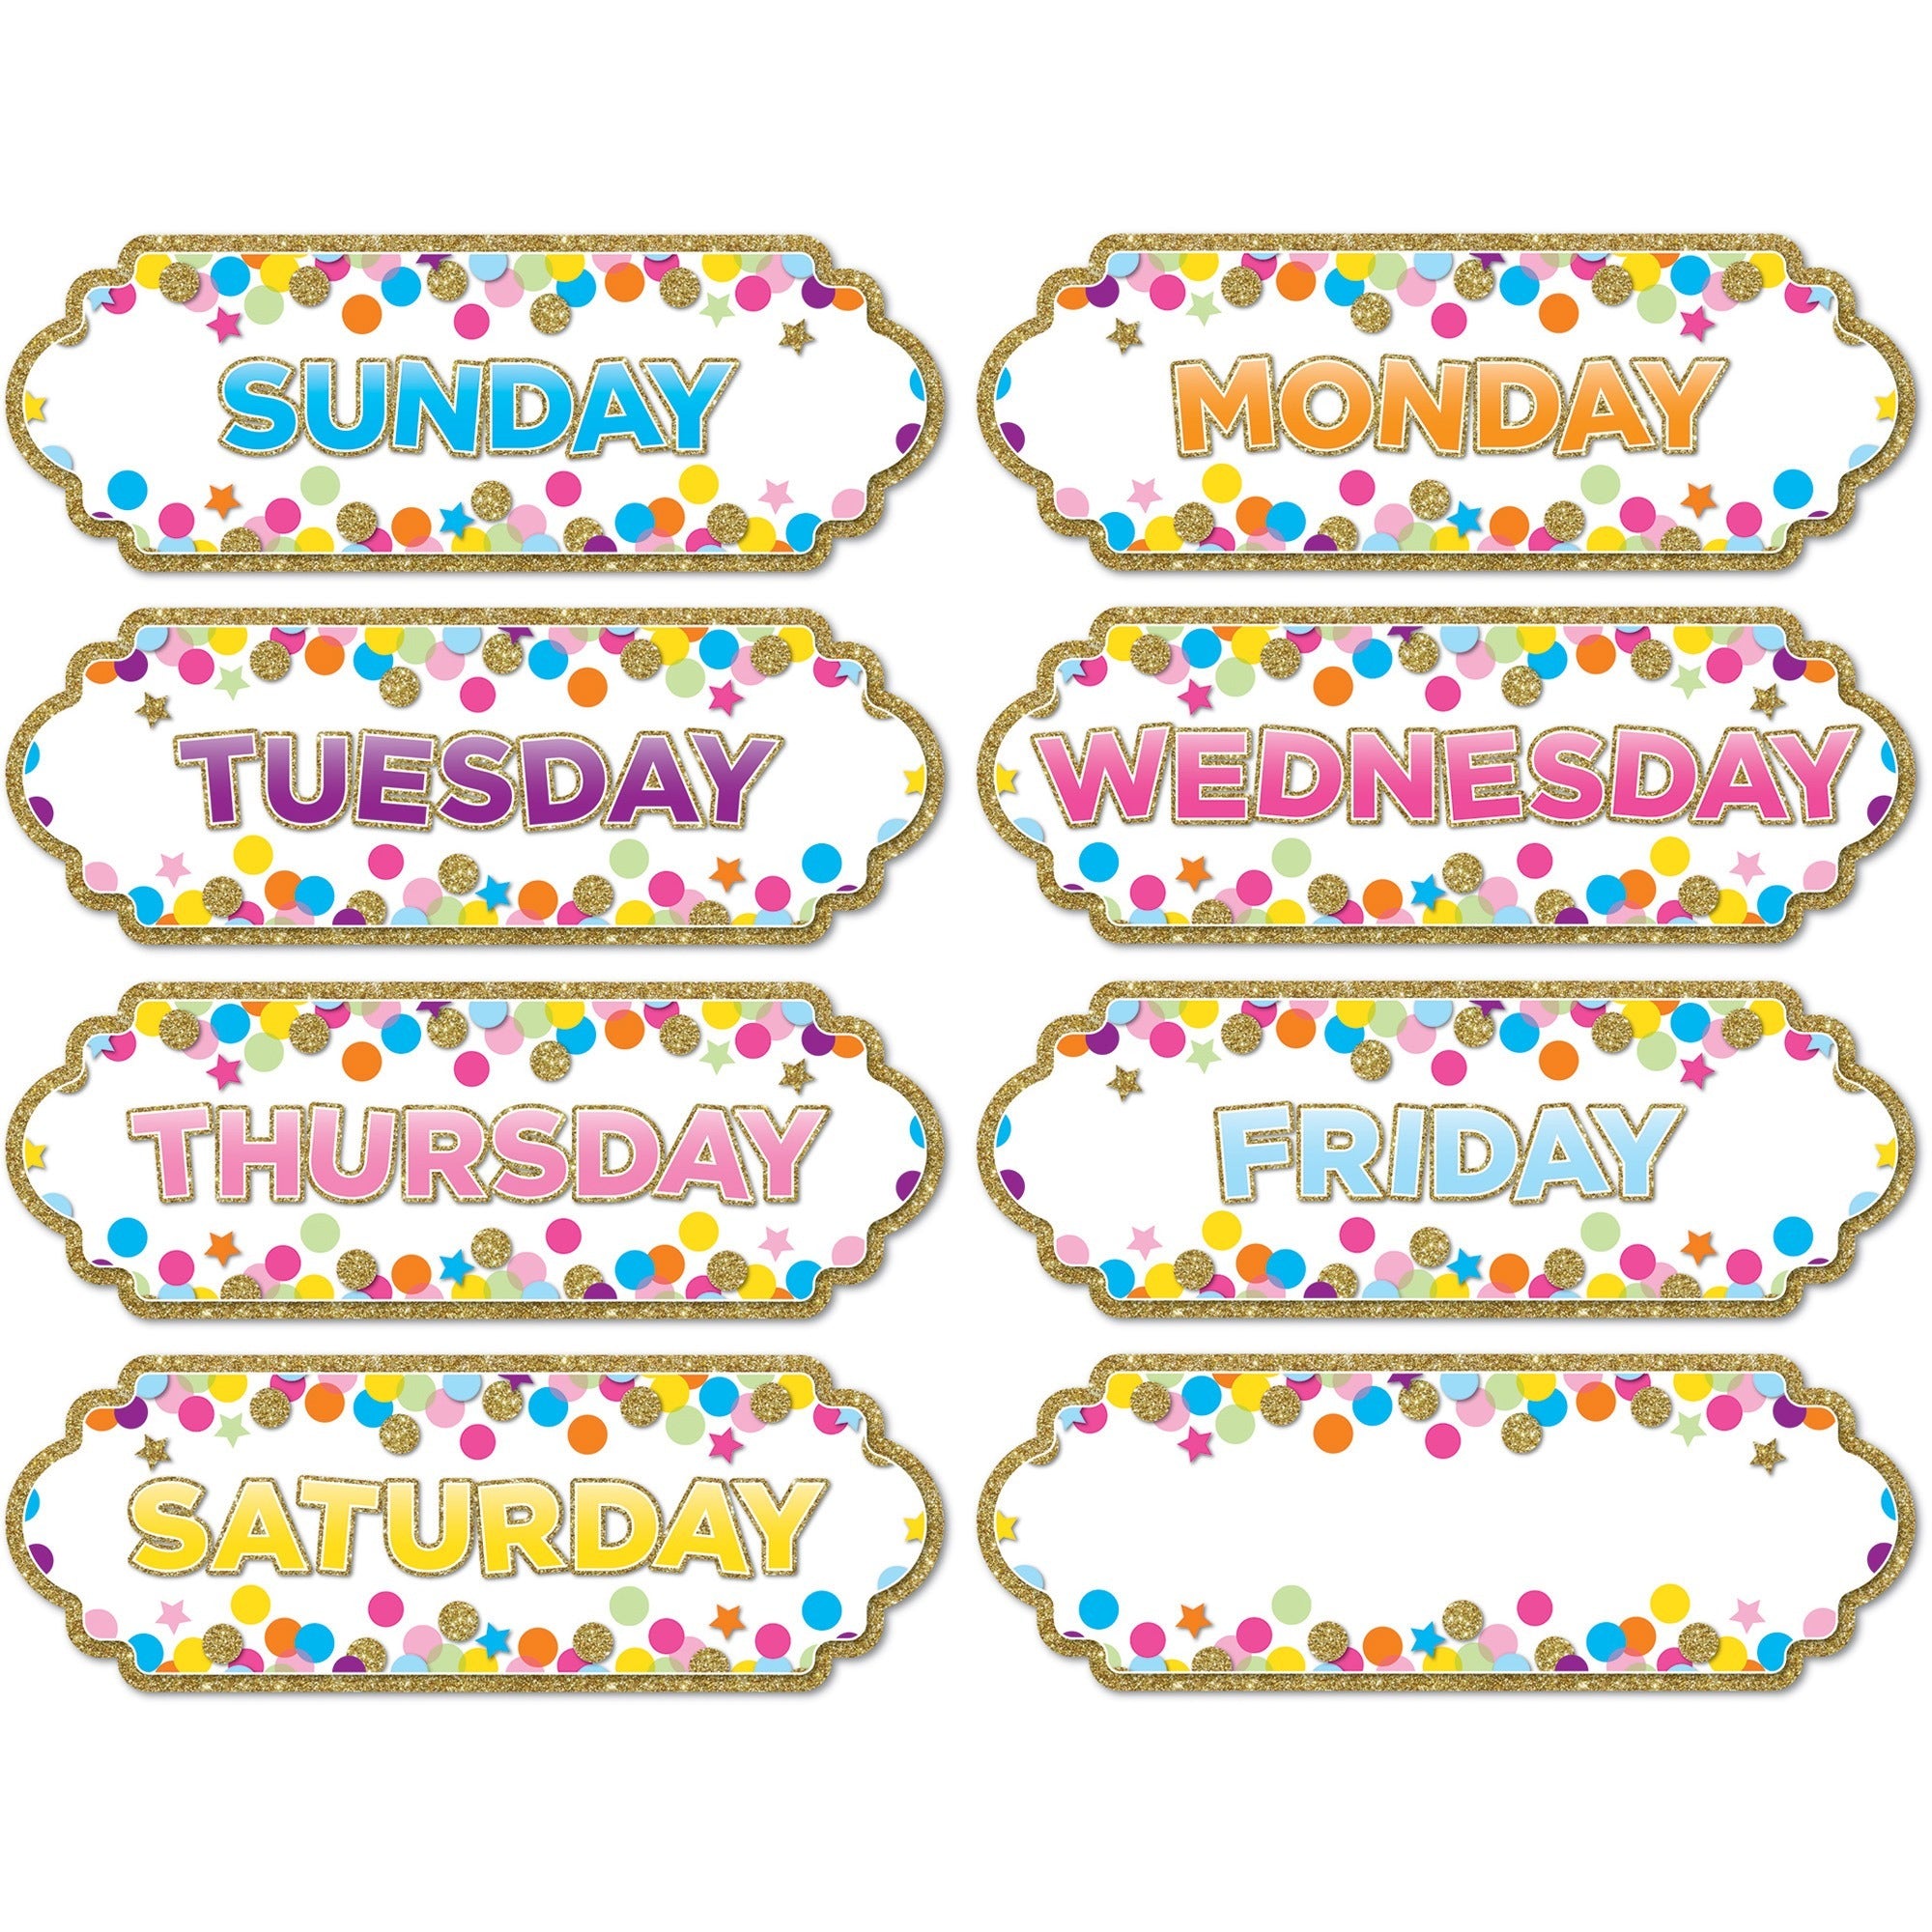 ashley-magnetic-confetti-days-timesavers-8-die-cut-write-on-wipe-off-1-each-multicolor_ash19006 - 1